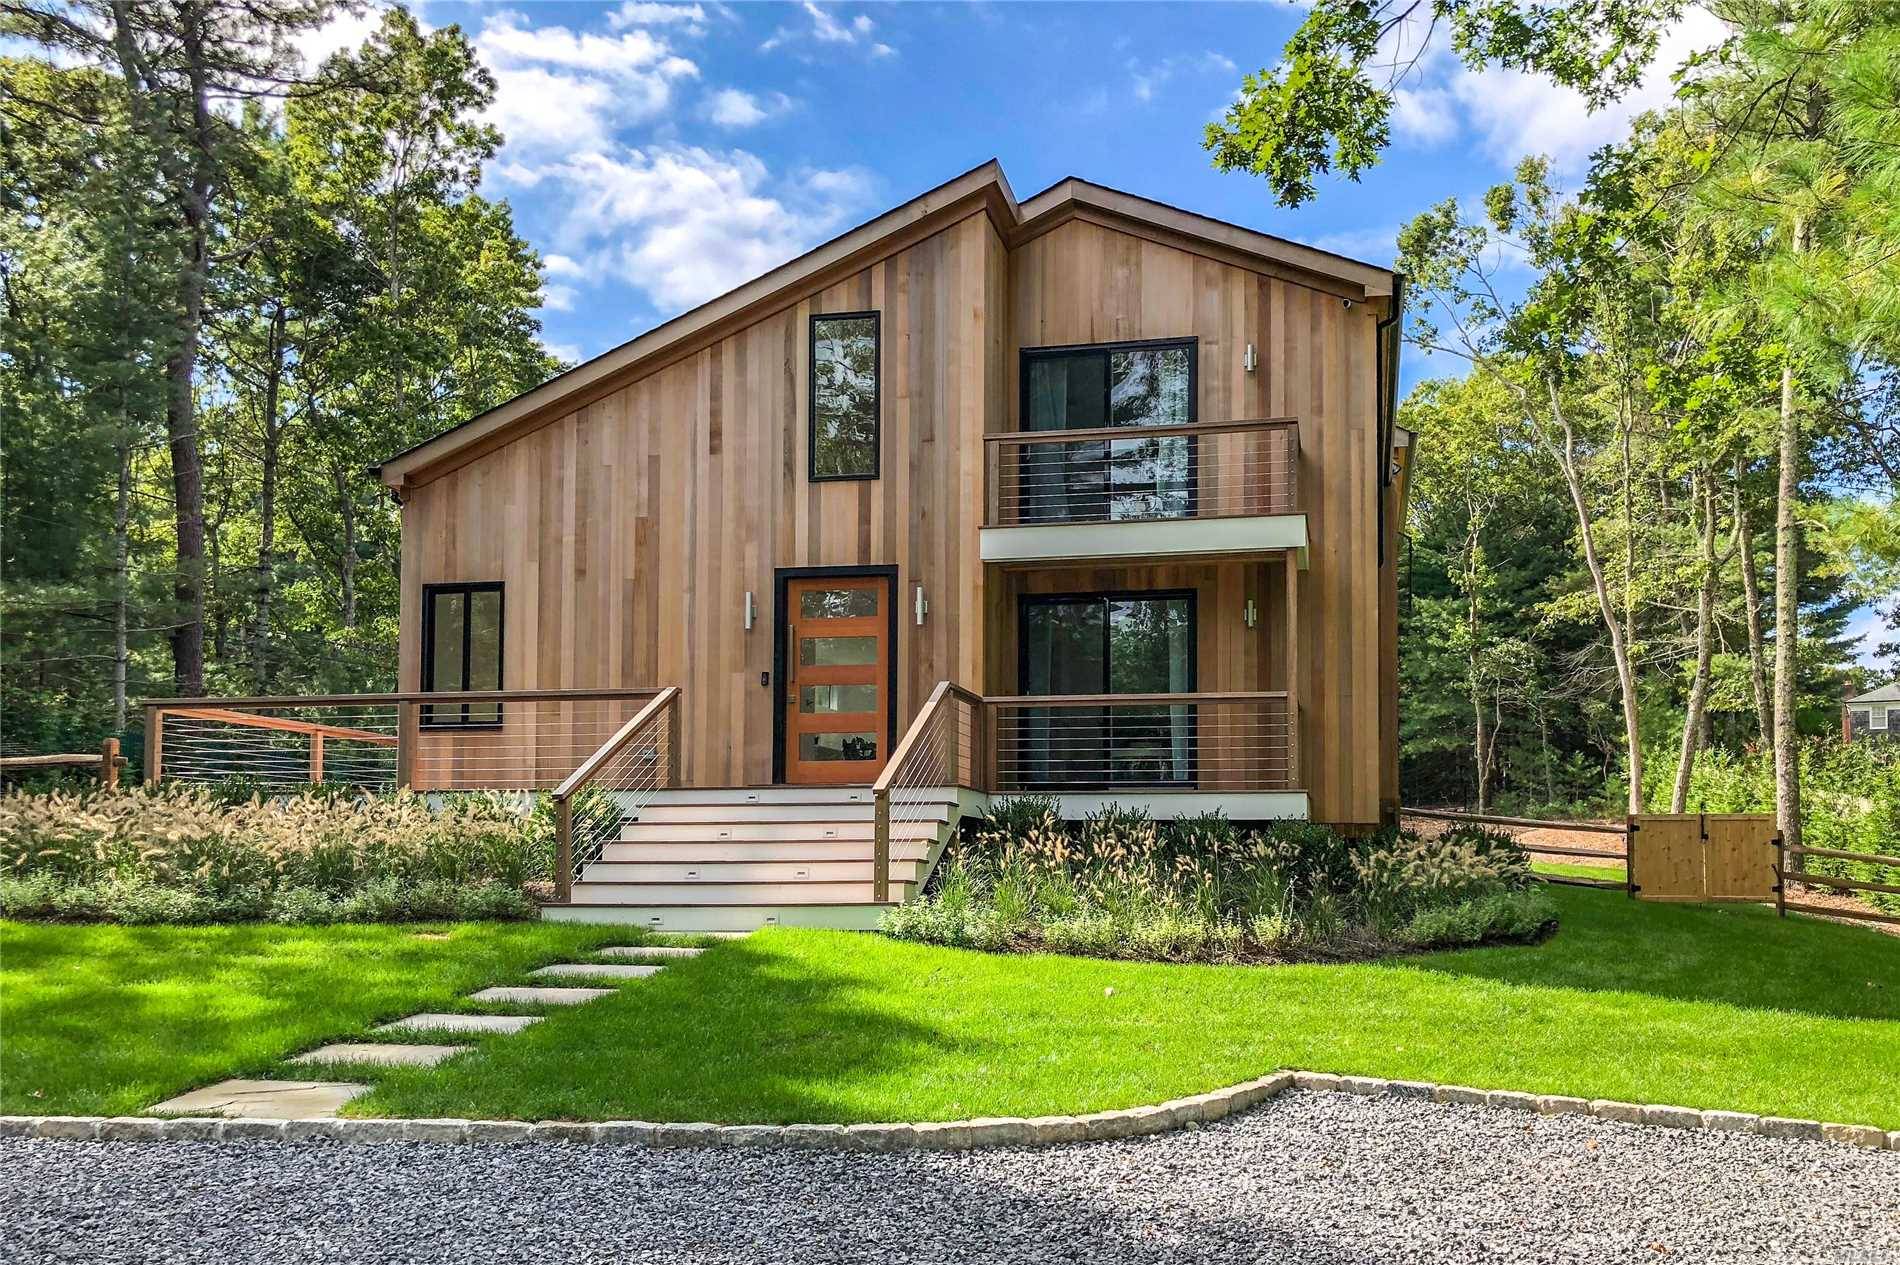 CHIC NEW EAST HAMPTON RENOVATION WITH POOL Enjoy this newly and completely renovated four bedroom four bath home on two acres.